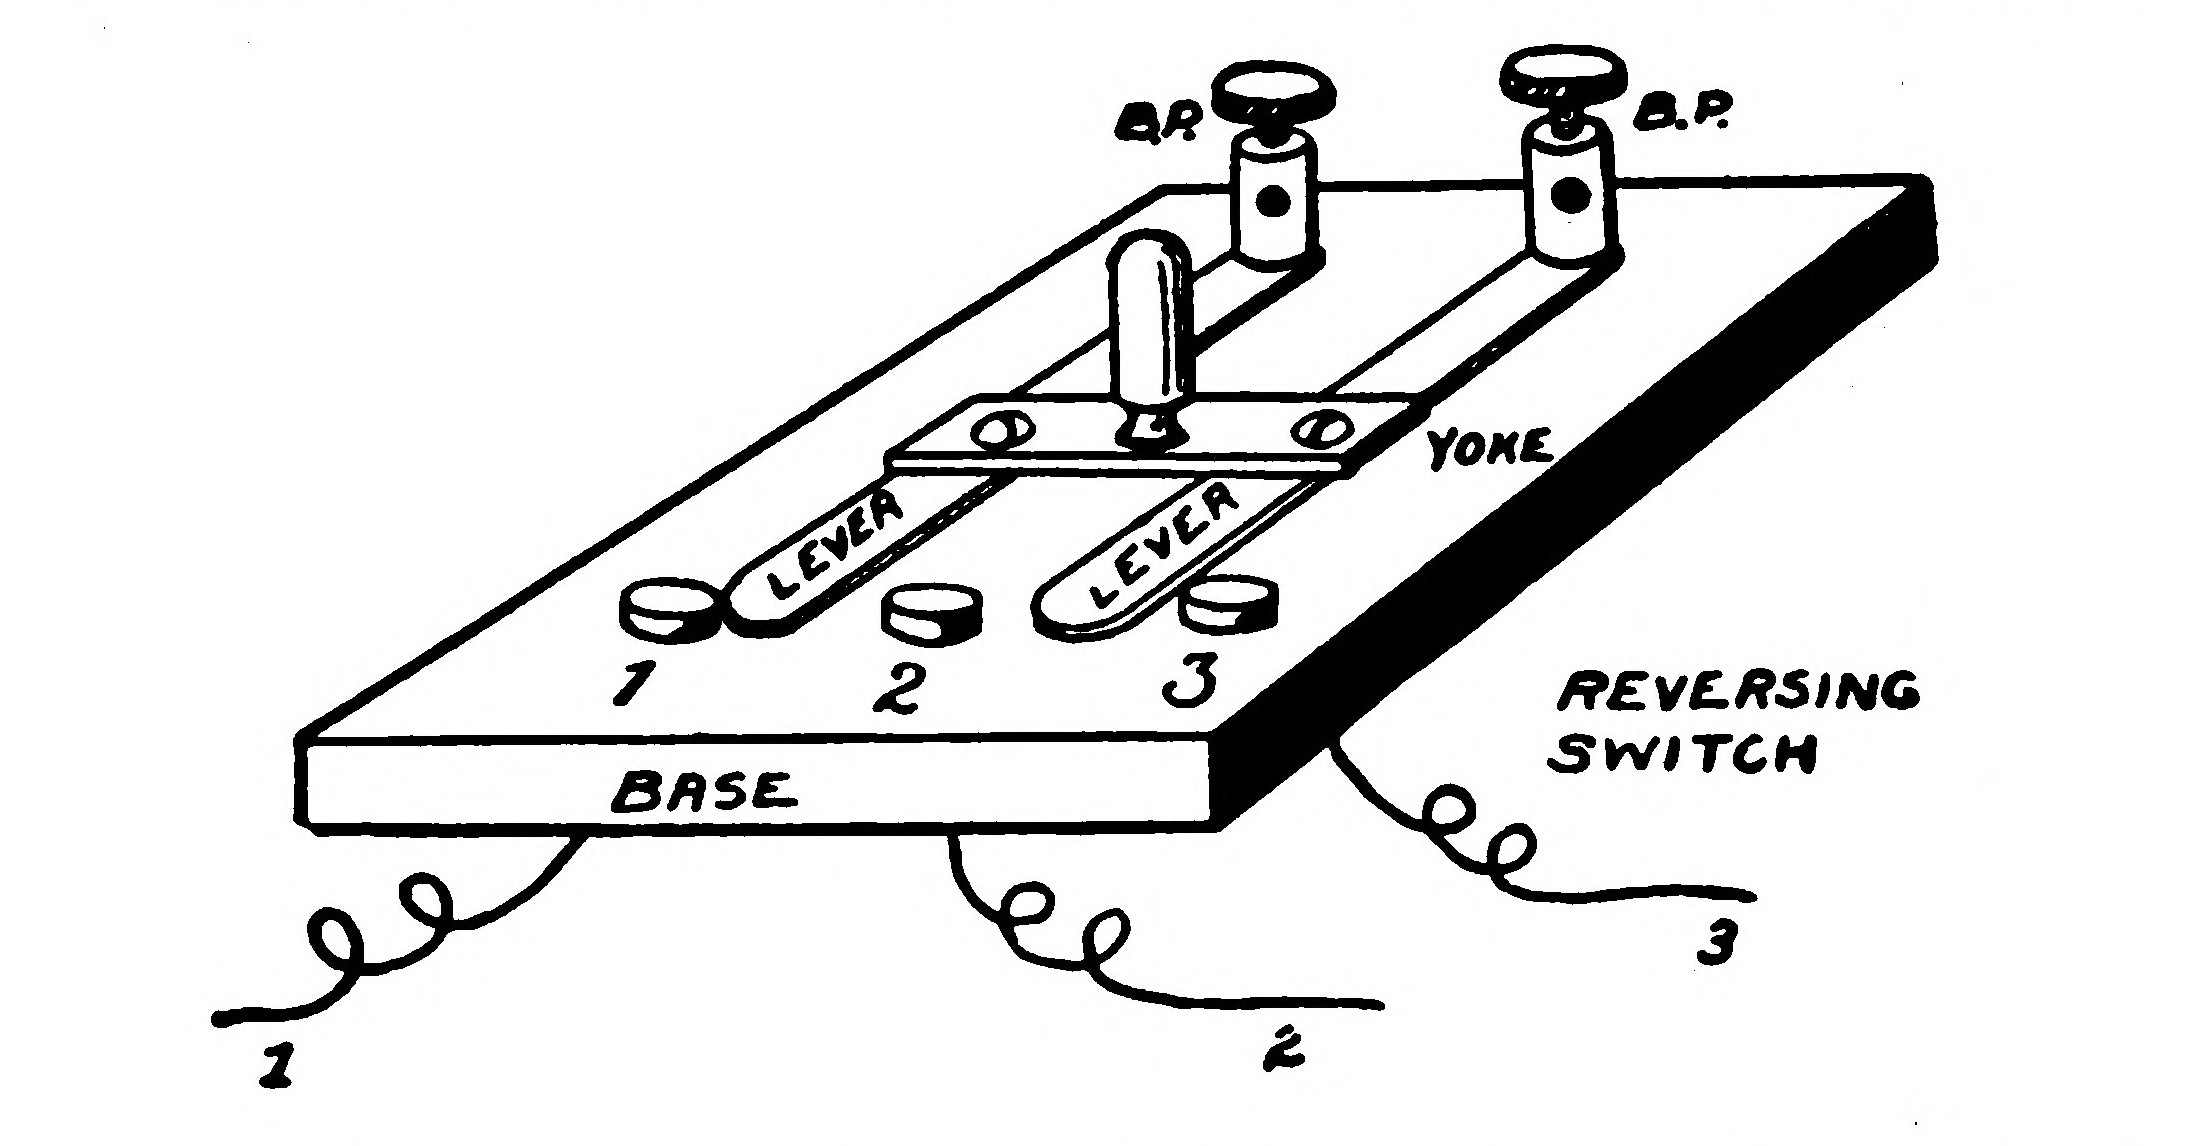 FIG. 76.—A Pole changing Switch for reversing Small Motors or the direction of an Electric Current.